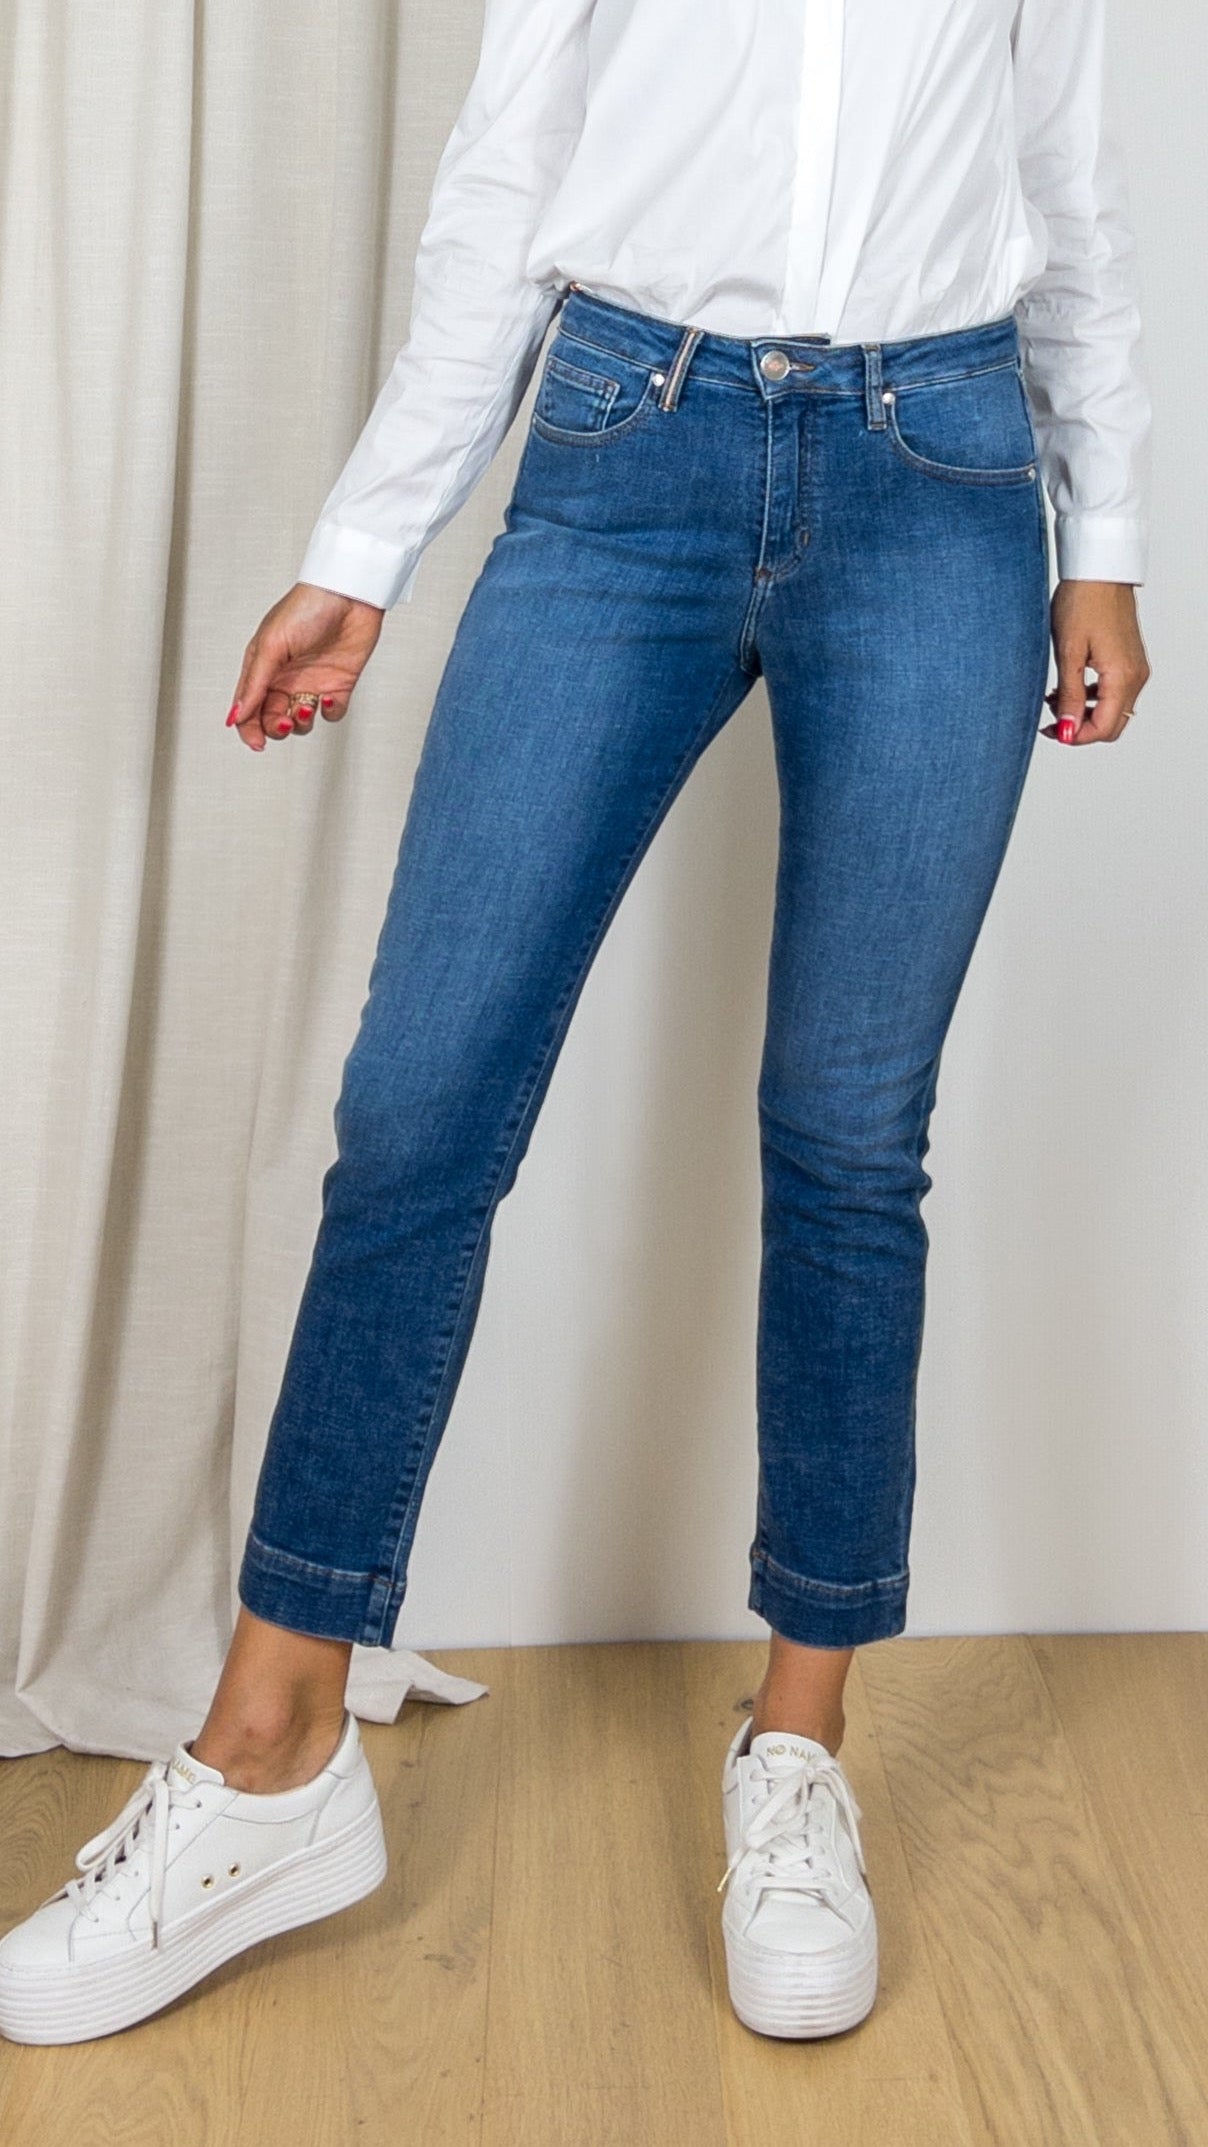 JEANS ISLOW MARIN RECYCLED BLUE DENIM